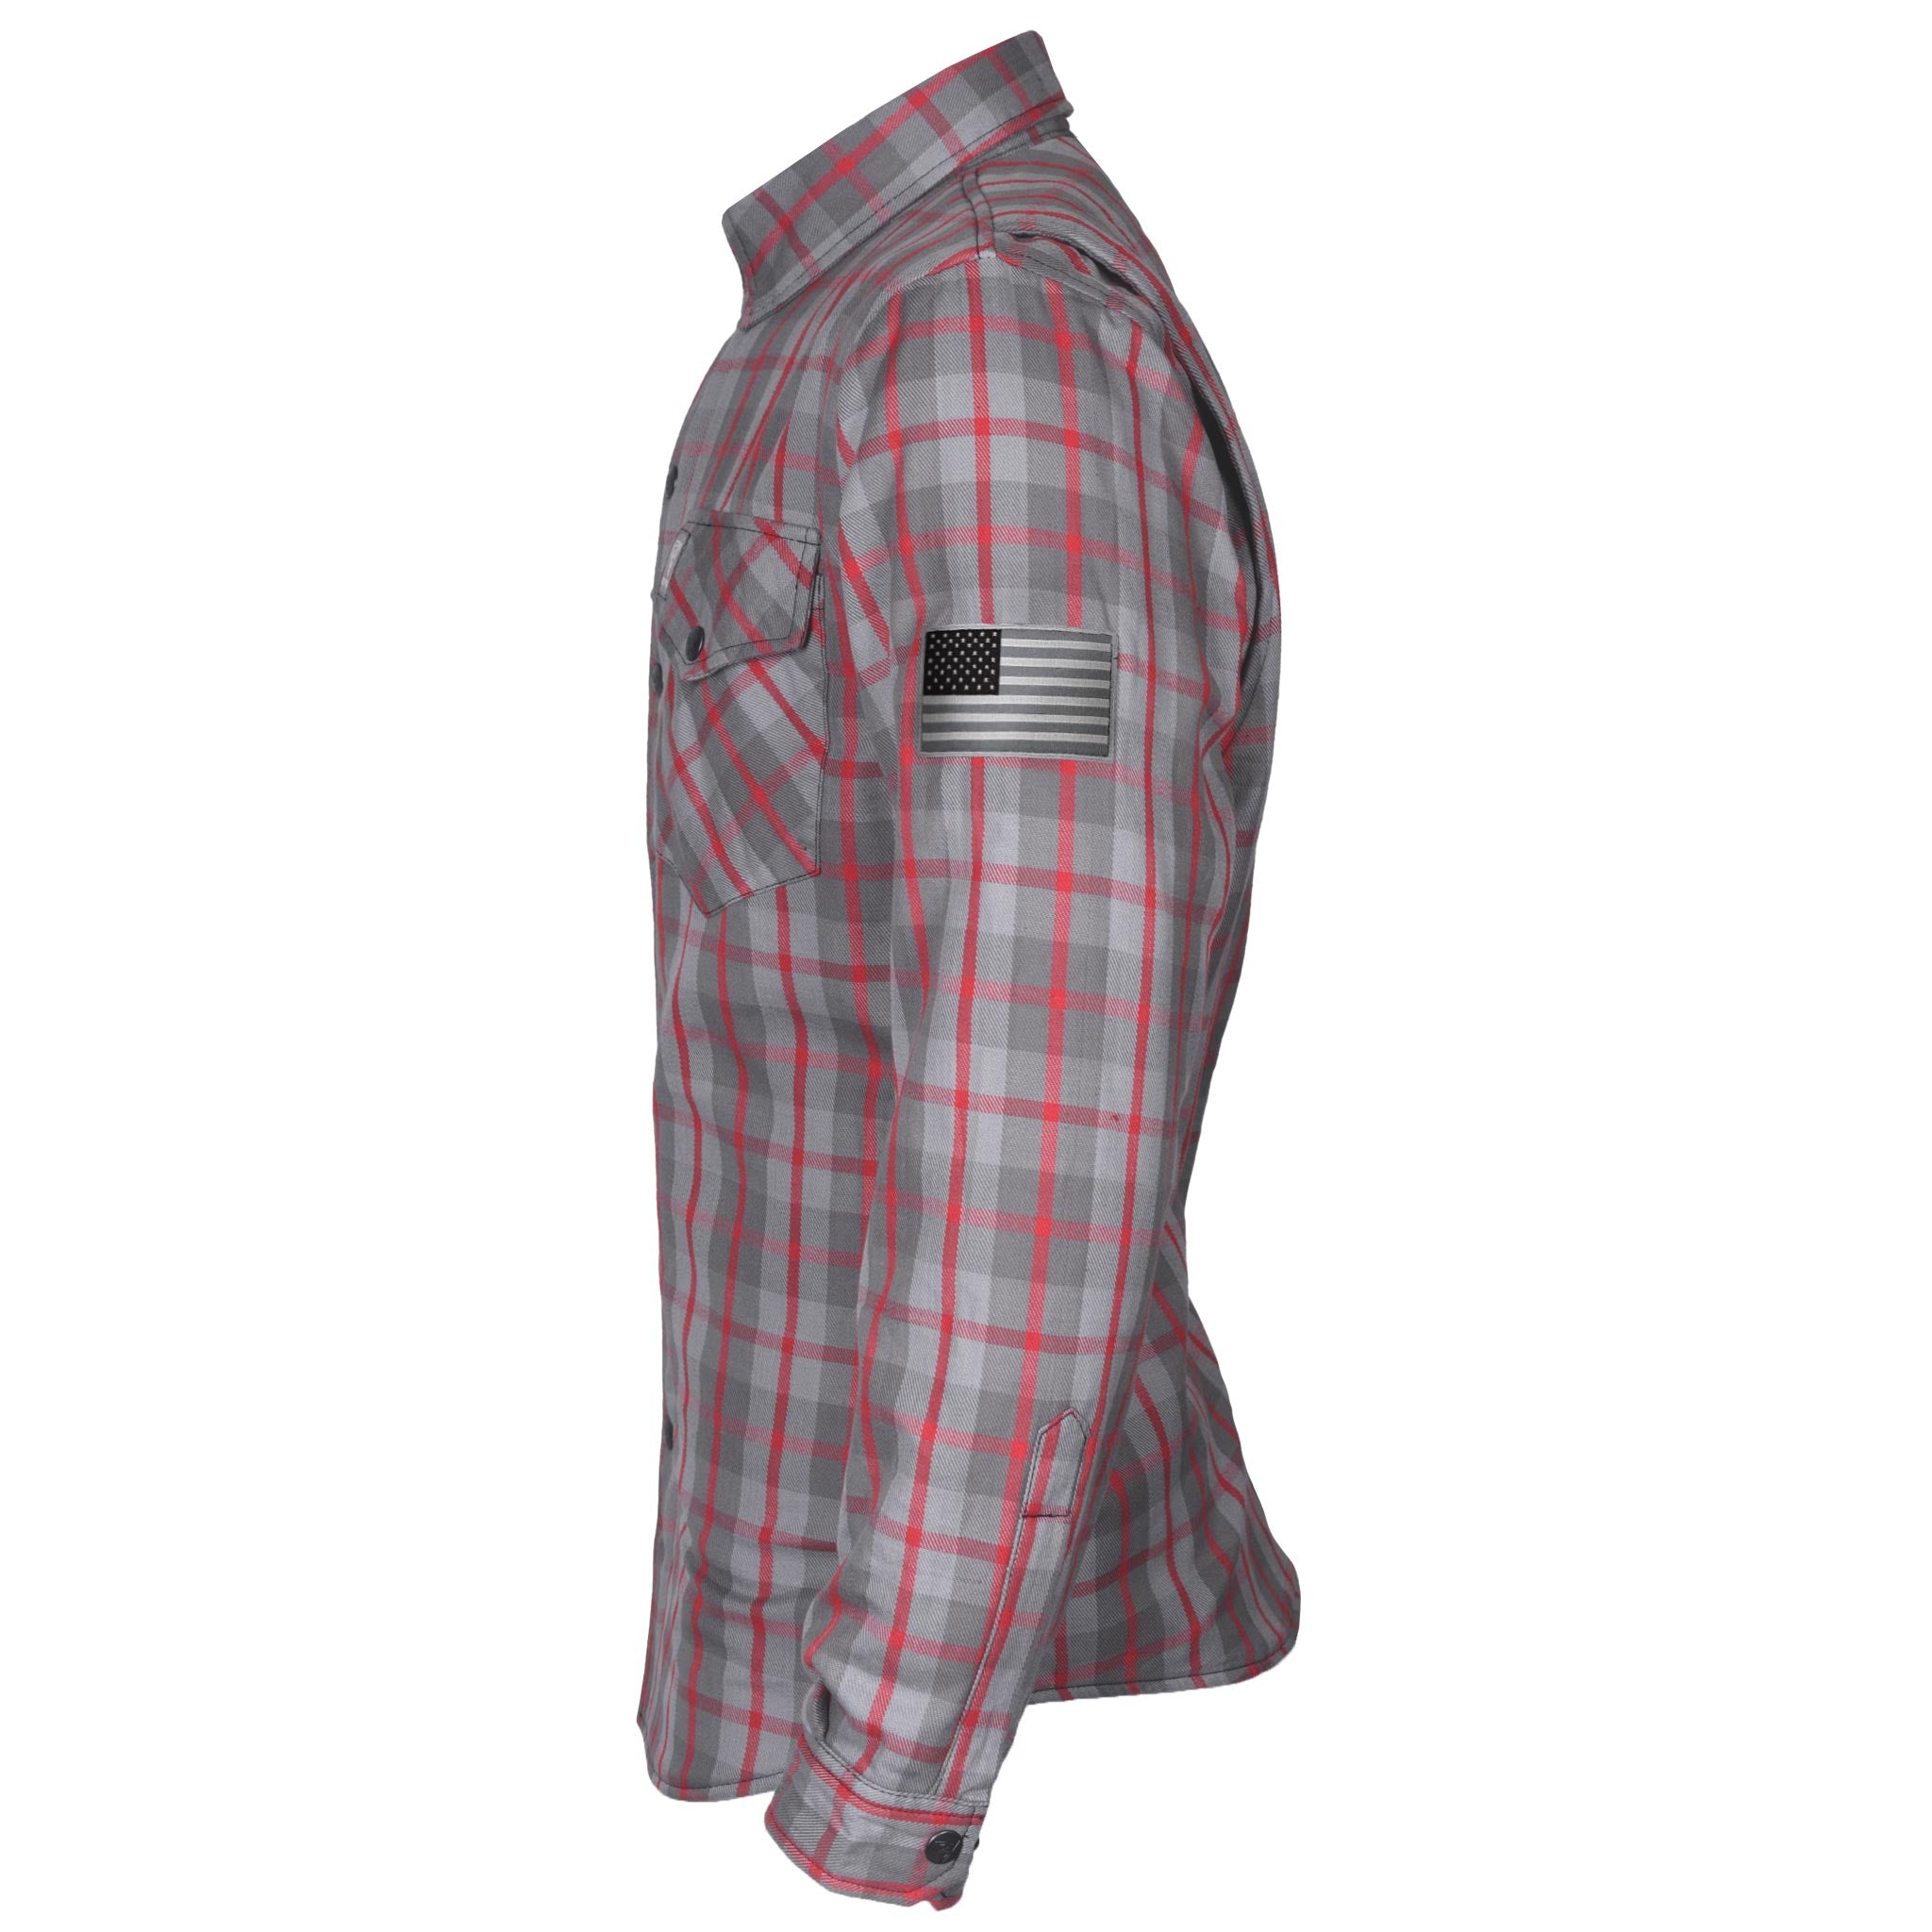 Protective Flannel Shirt "Rogue Road" - Grey and Red Stripes with Pads